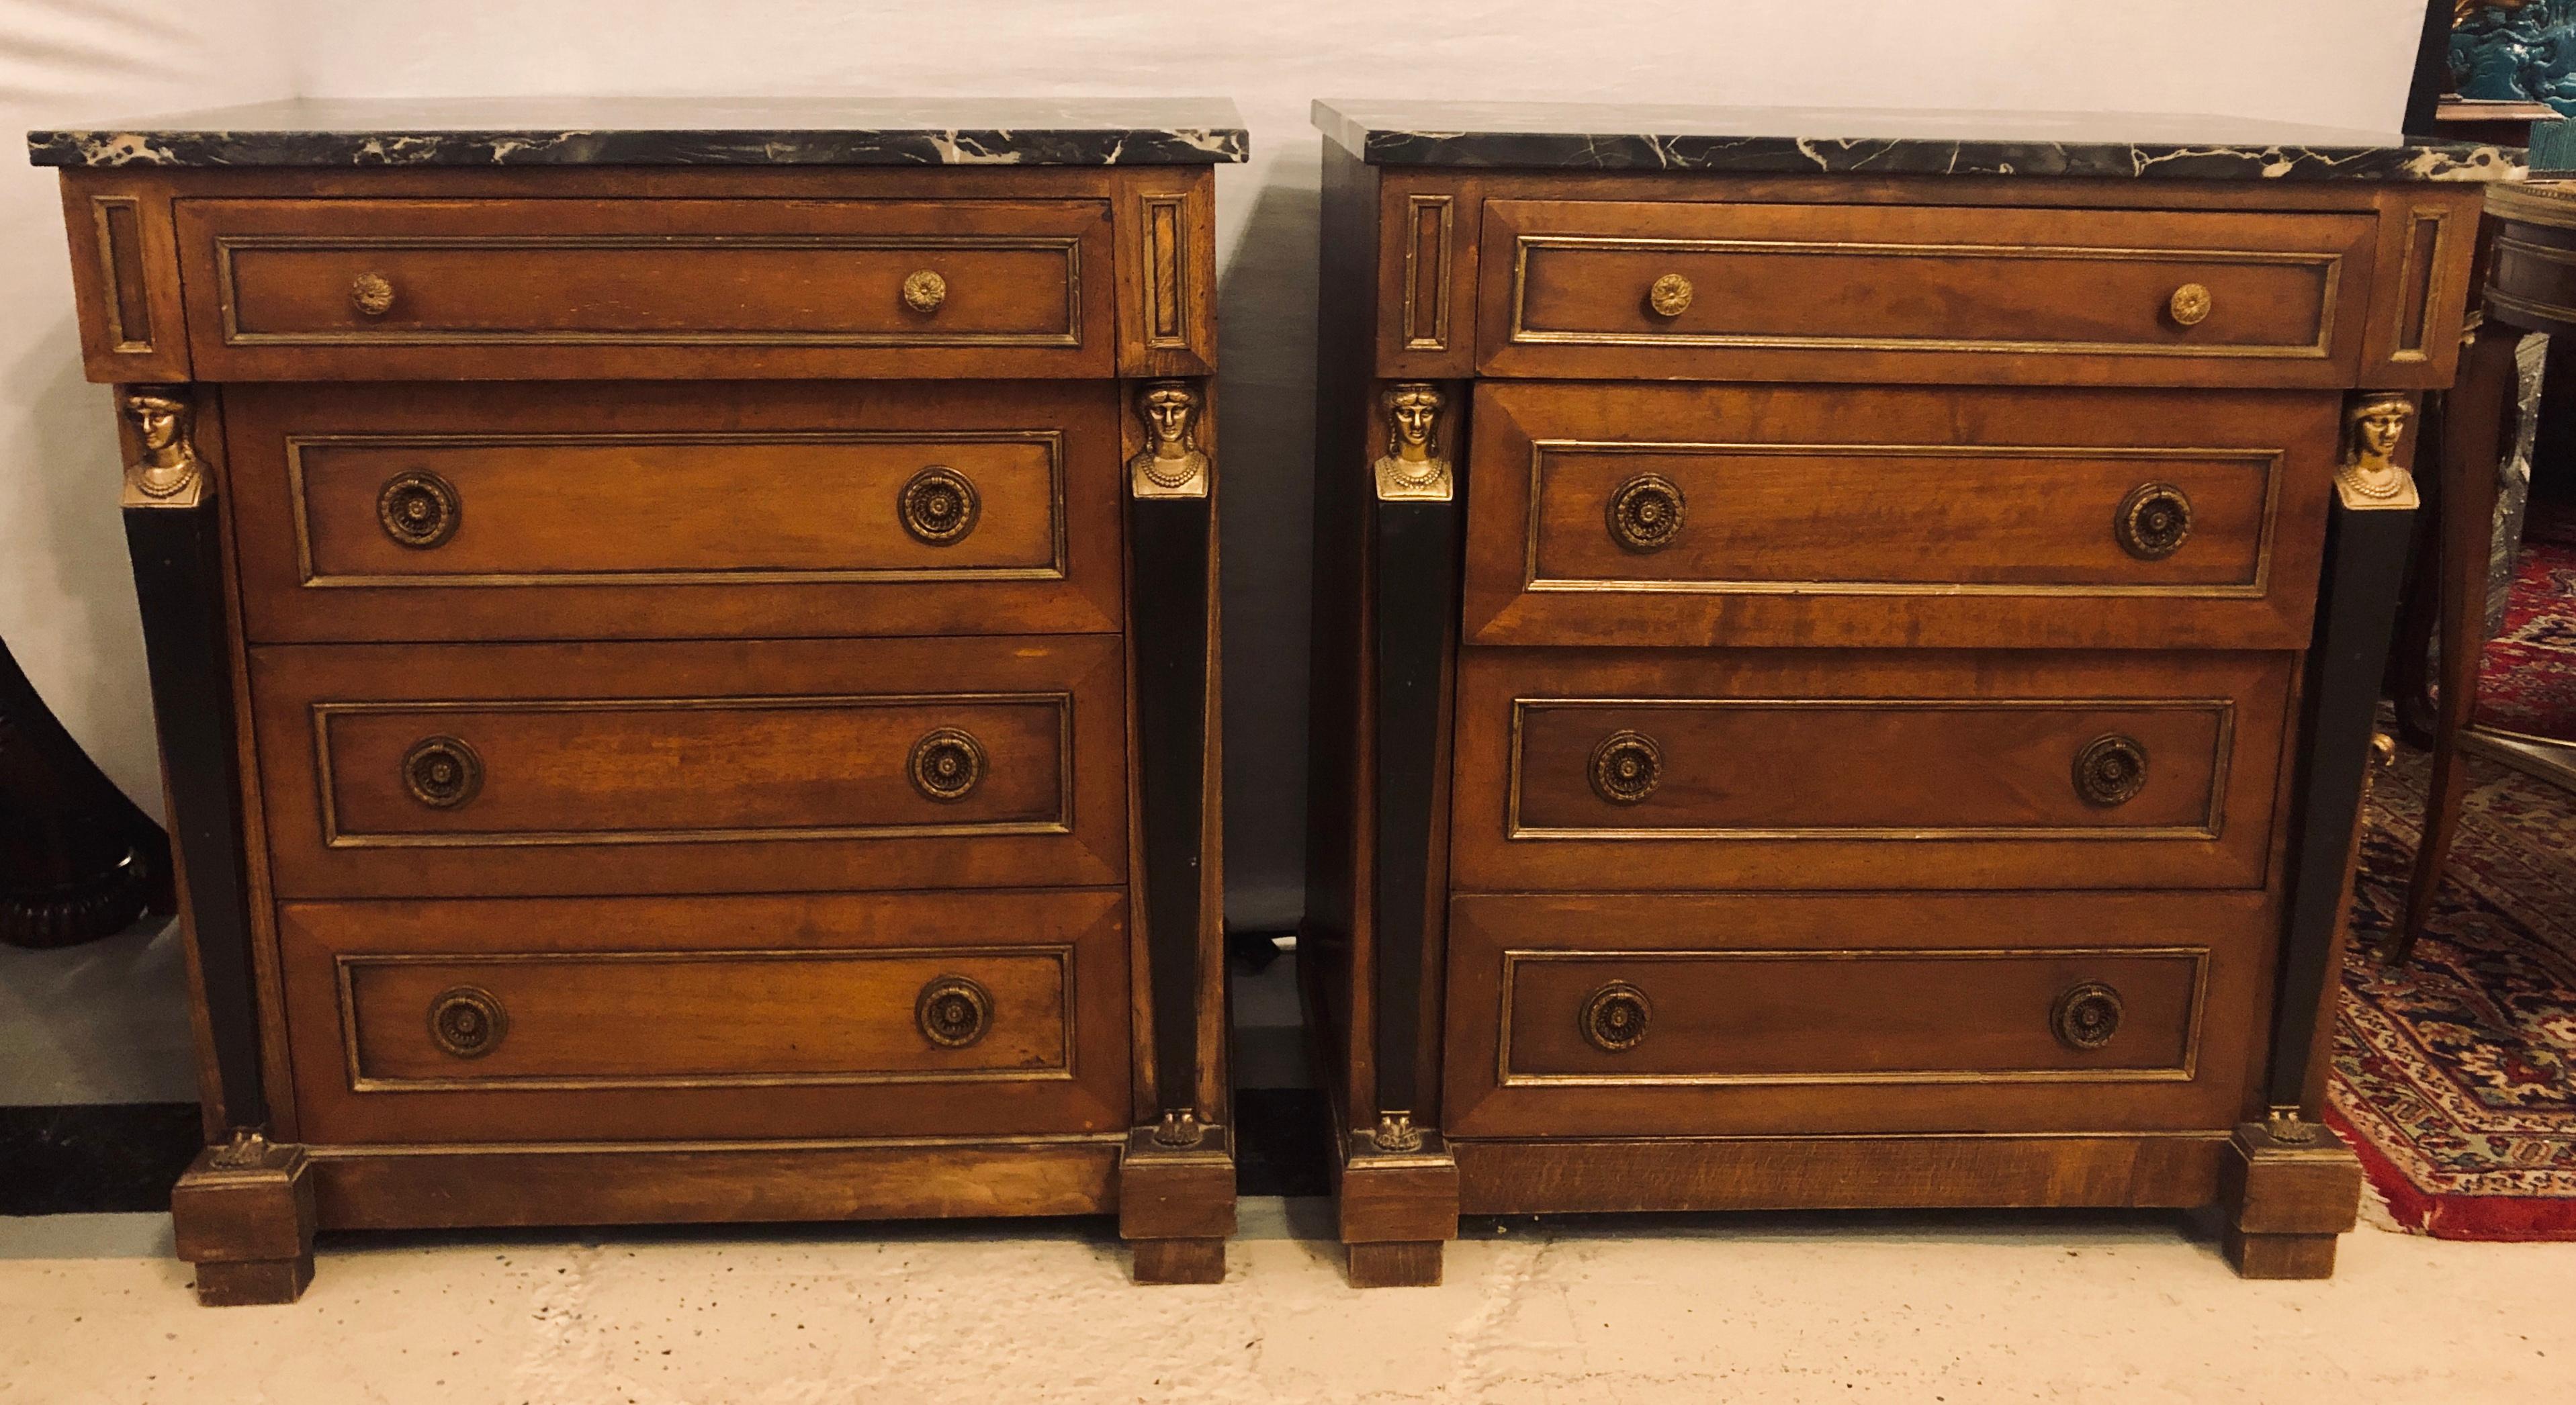 Pair of Empire style bronze mounted commodes or nightstands or end tables. The pair with black marble tops under four bronze framed drawers flanked by ebony bodied full figured ladies with bronze busts and feet. In good condition.